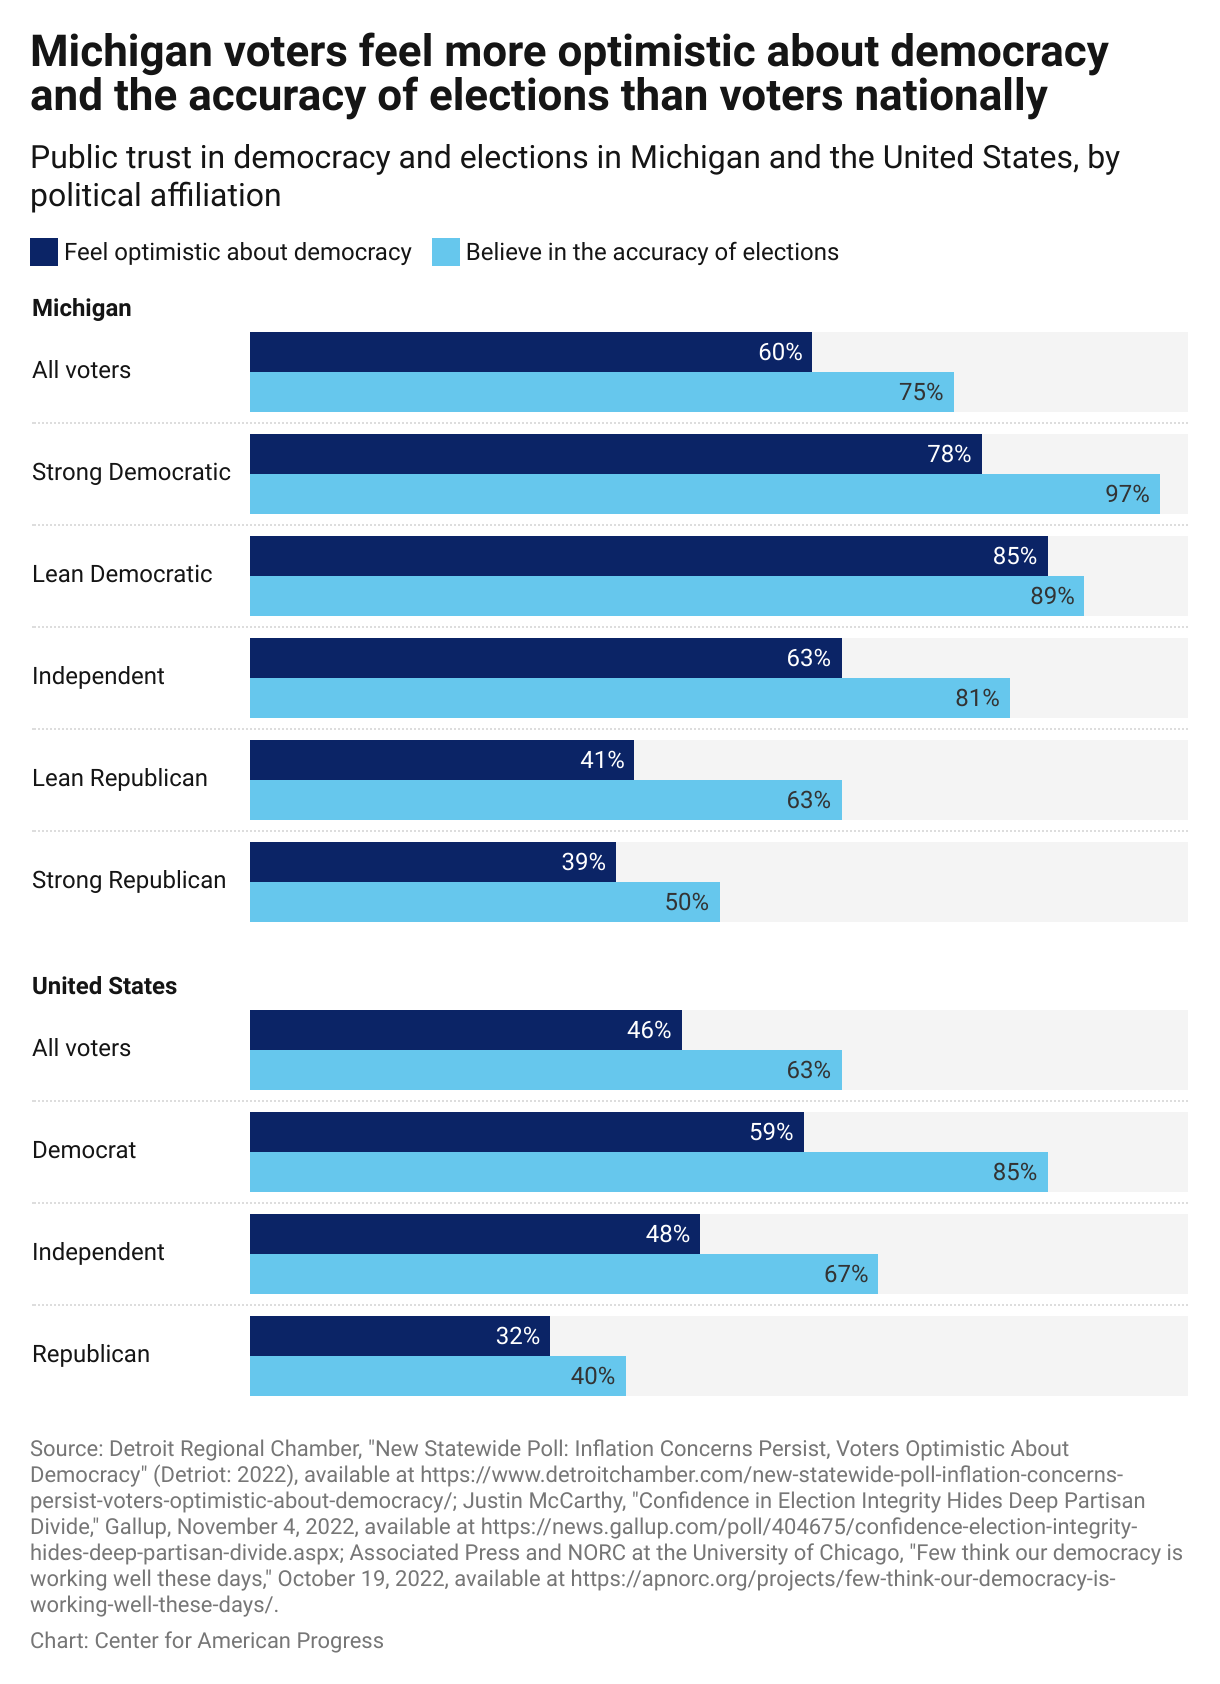 Chart showing the varying confidence in the state of democracy and the accuracy of elections between Michigan voters and voters across the United States, for voters at large as well as Democratic, independent, and Republican voters.
